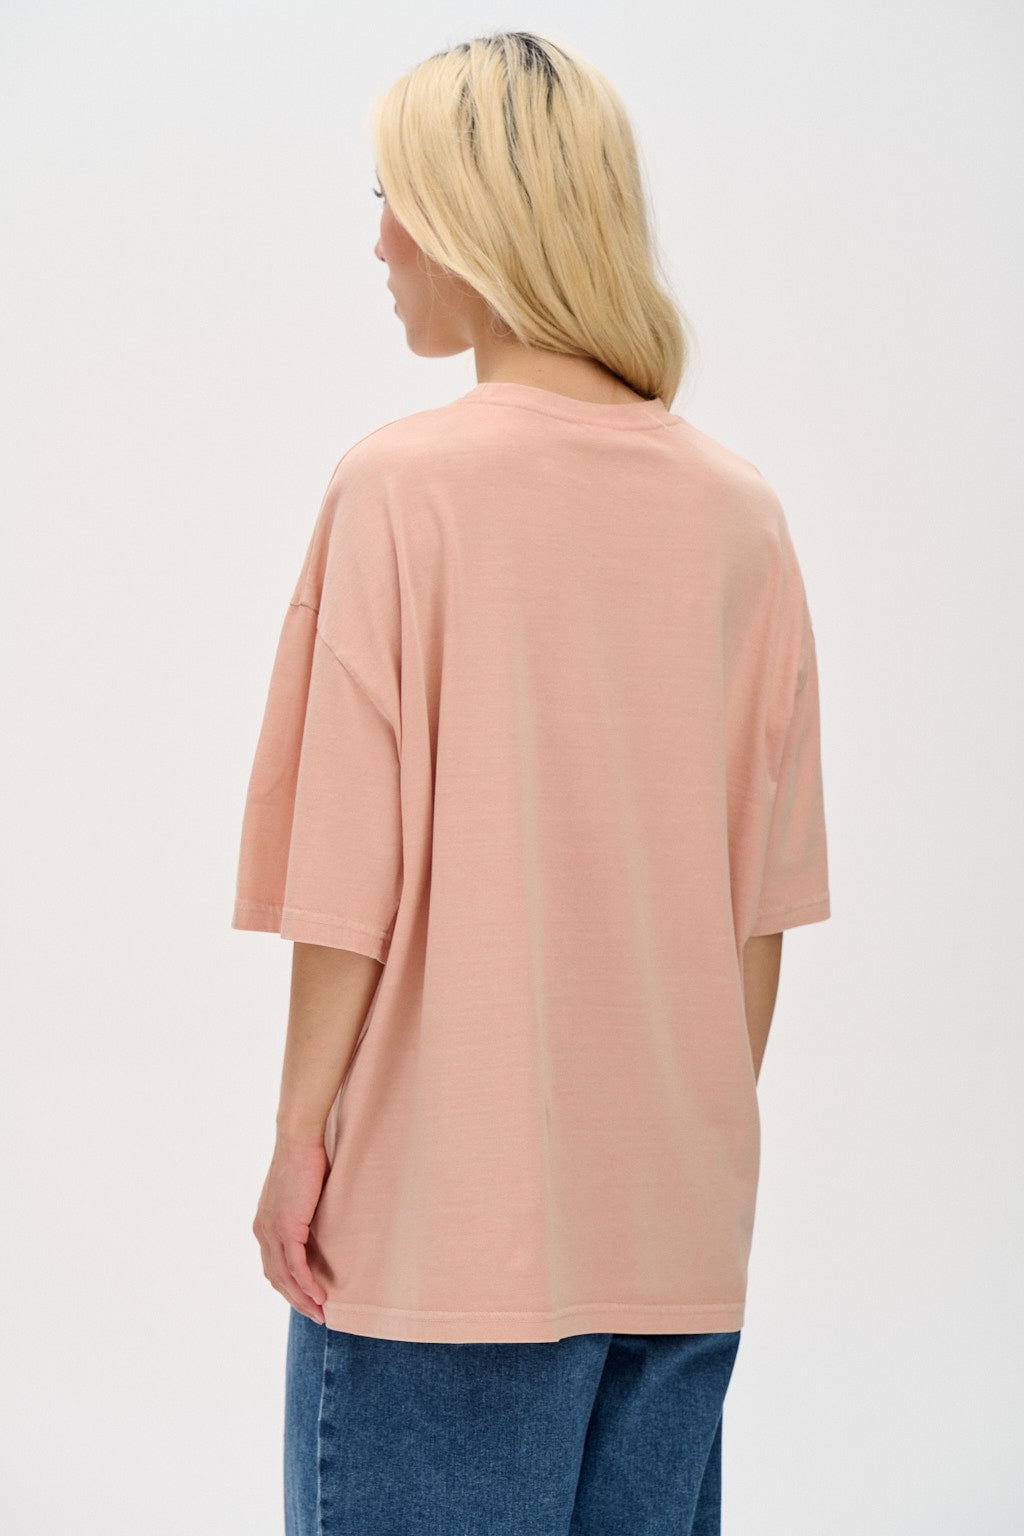 Lucy & Yak Tops Benny Tee: ORGANIC COTTON EARTH PIGMENT- Light Rose